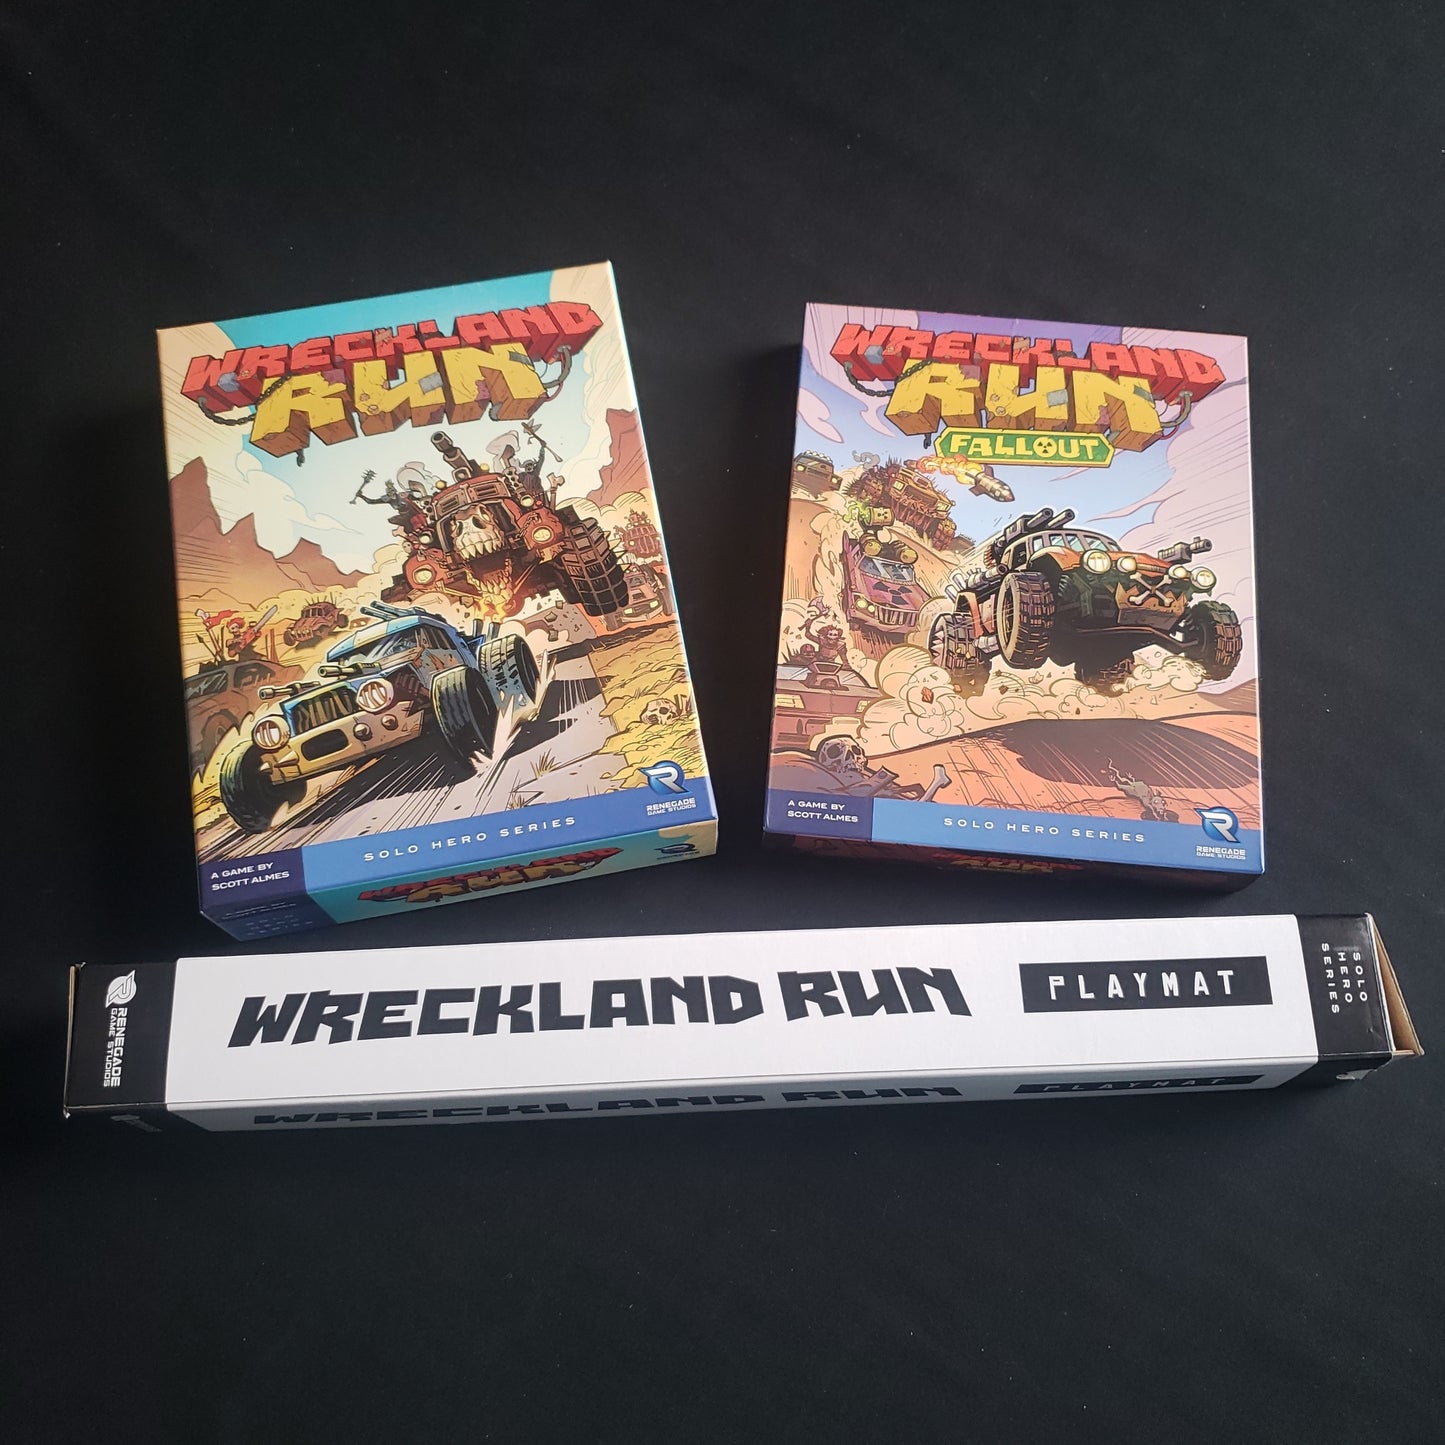 Image shows the front of the boxes for the board game Wreckland Run, its Fallout expansion, and the playmat